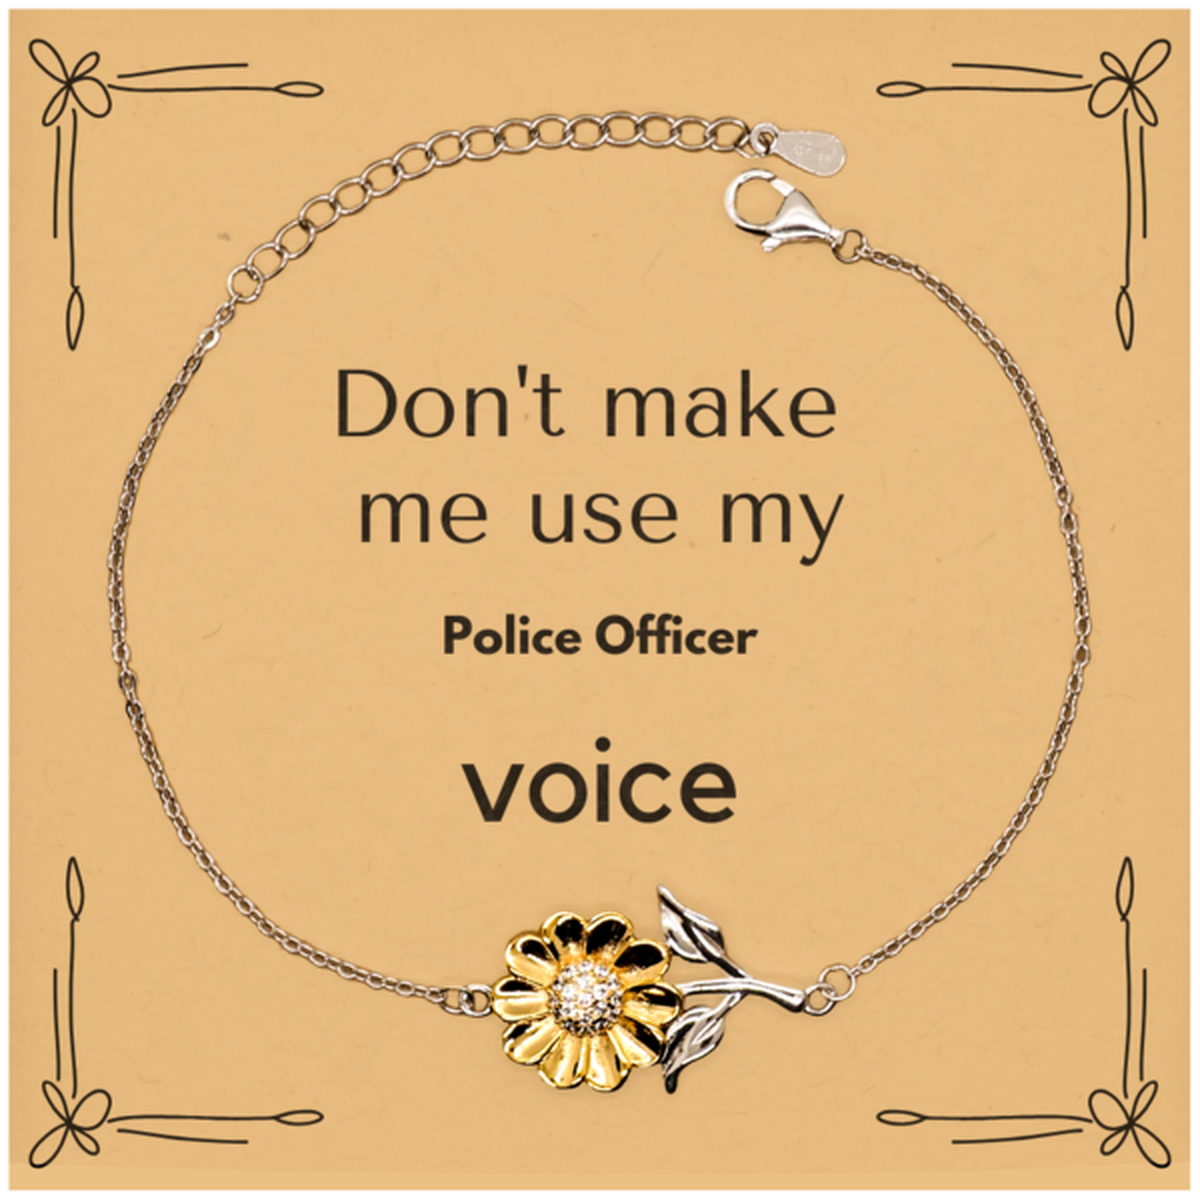 Don't make me use my Police Officer voice, Sarcasm Police Officer Card Gifts, Christmas Police Officer Sunflower Bracelet Birthday Unique Gifts For Police Officer Coworkers, Men, Women, Colleague, Friends